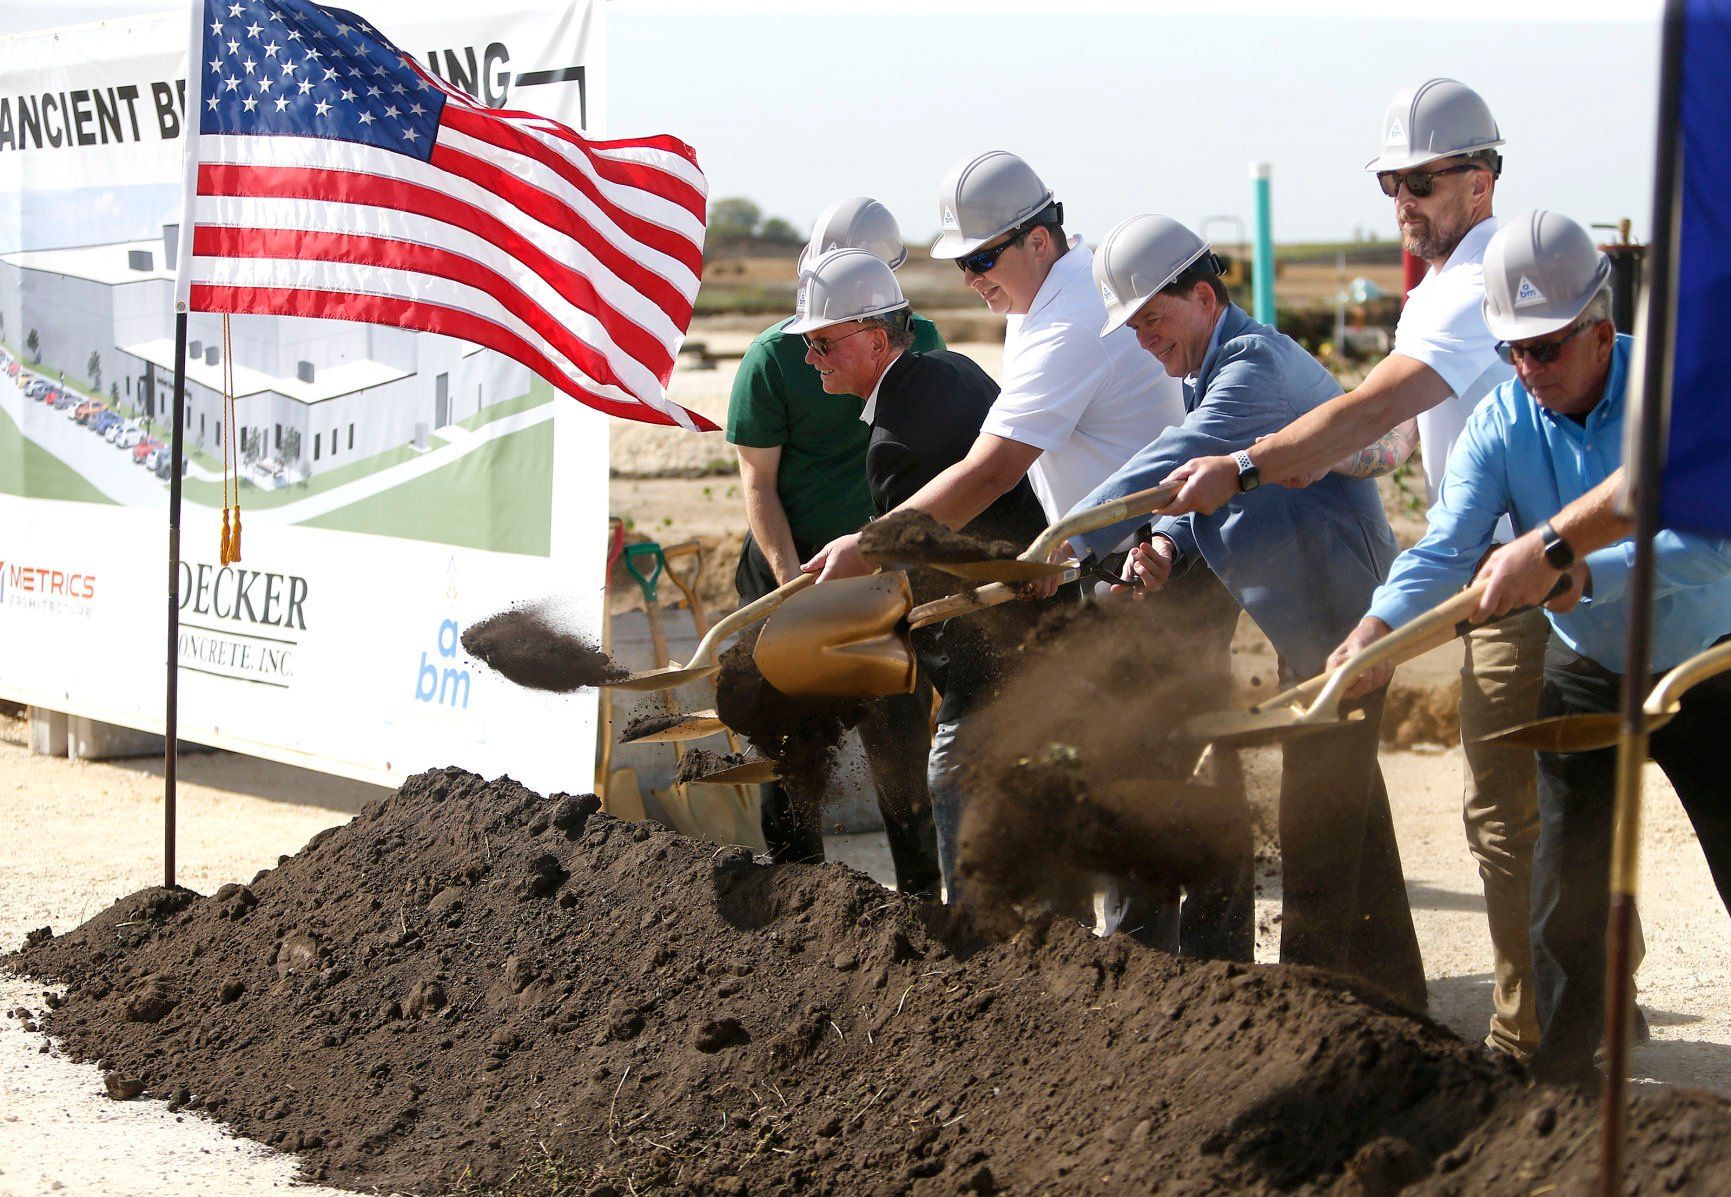 Representatives take part in a groundbreaking event for Ancient Brands Milling on Tuesday, Oct. 4, 2022. The manufacturer, which makes organic and non-GMO puffed grains, has planned a $26.5 million, 92,000-square-foot project in Dyersville’s 20 West Industrial Park.    PHOTO CREDIT: Dave Kettering